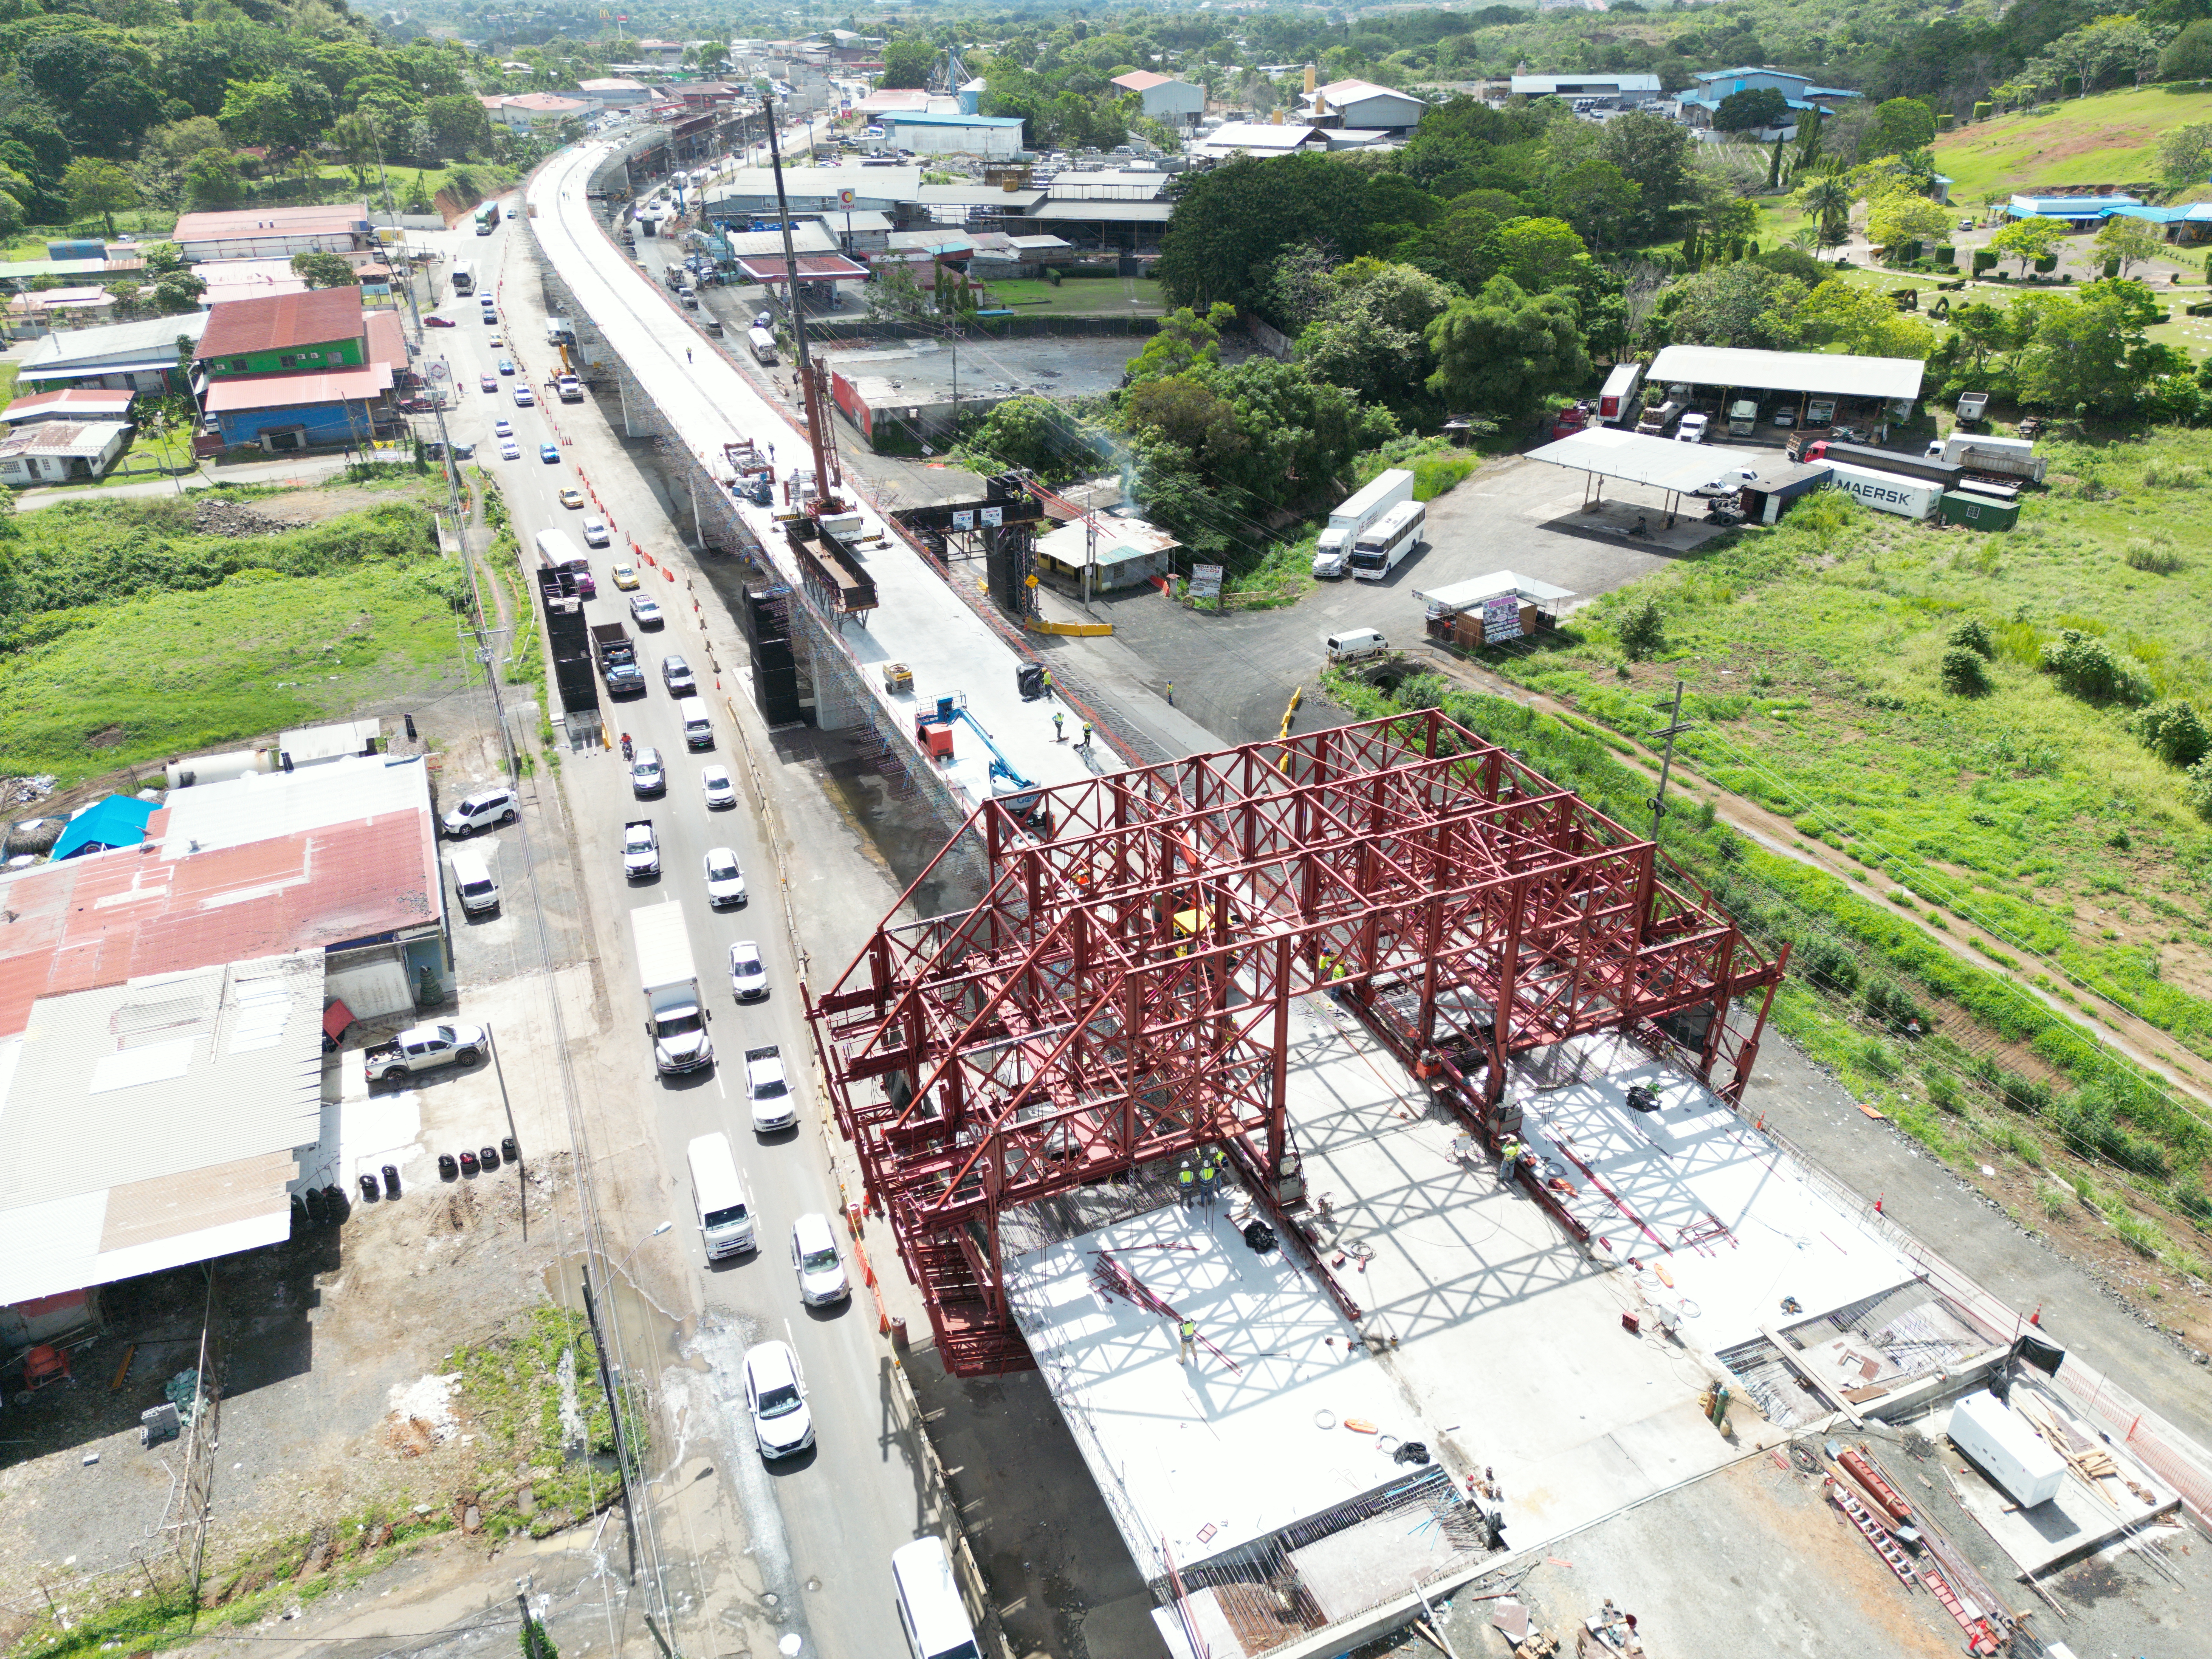 AND THE SECOND PHASE OF THE LA CHORRERA VIADUCT USING WAGON-BUILT FORMWORK